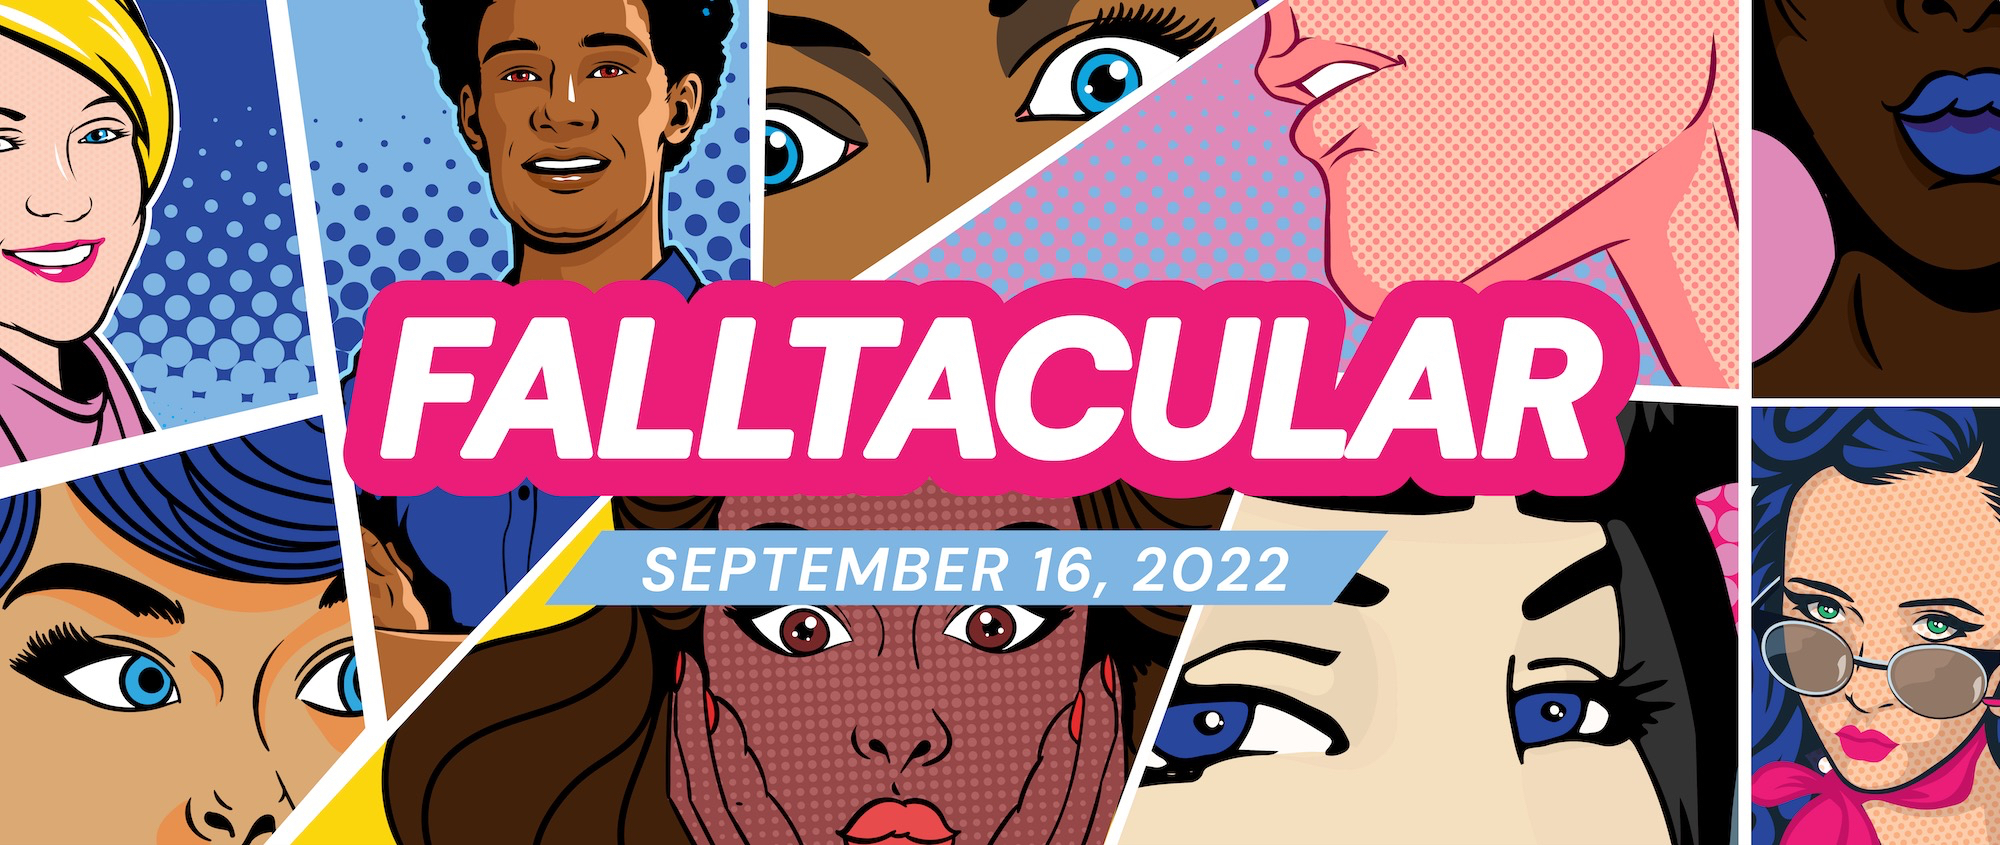 Falltacular collage with pop art stylized illustrations